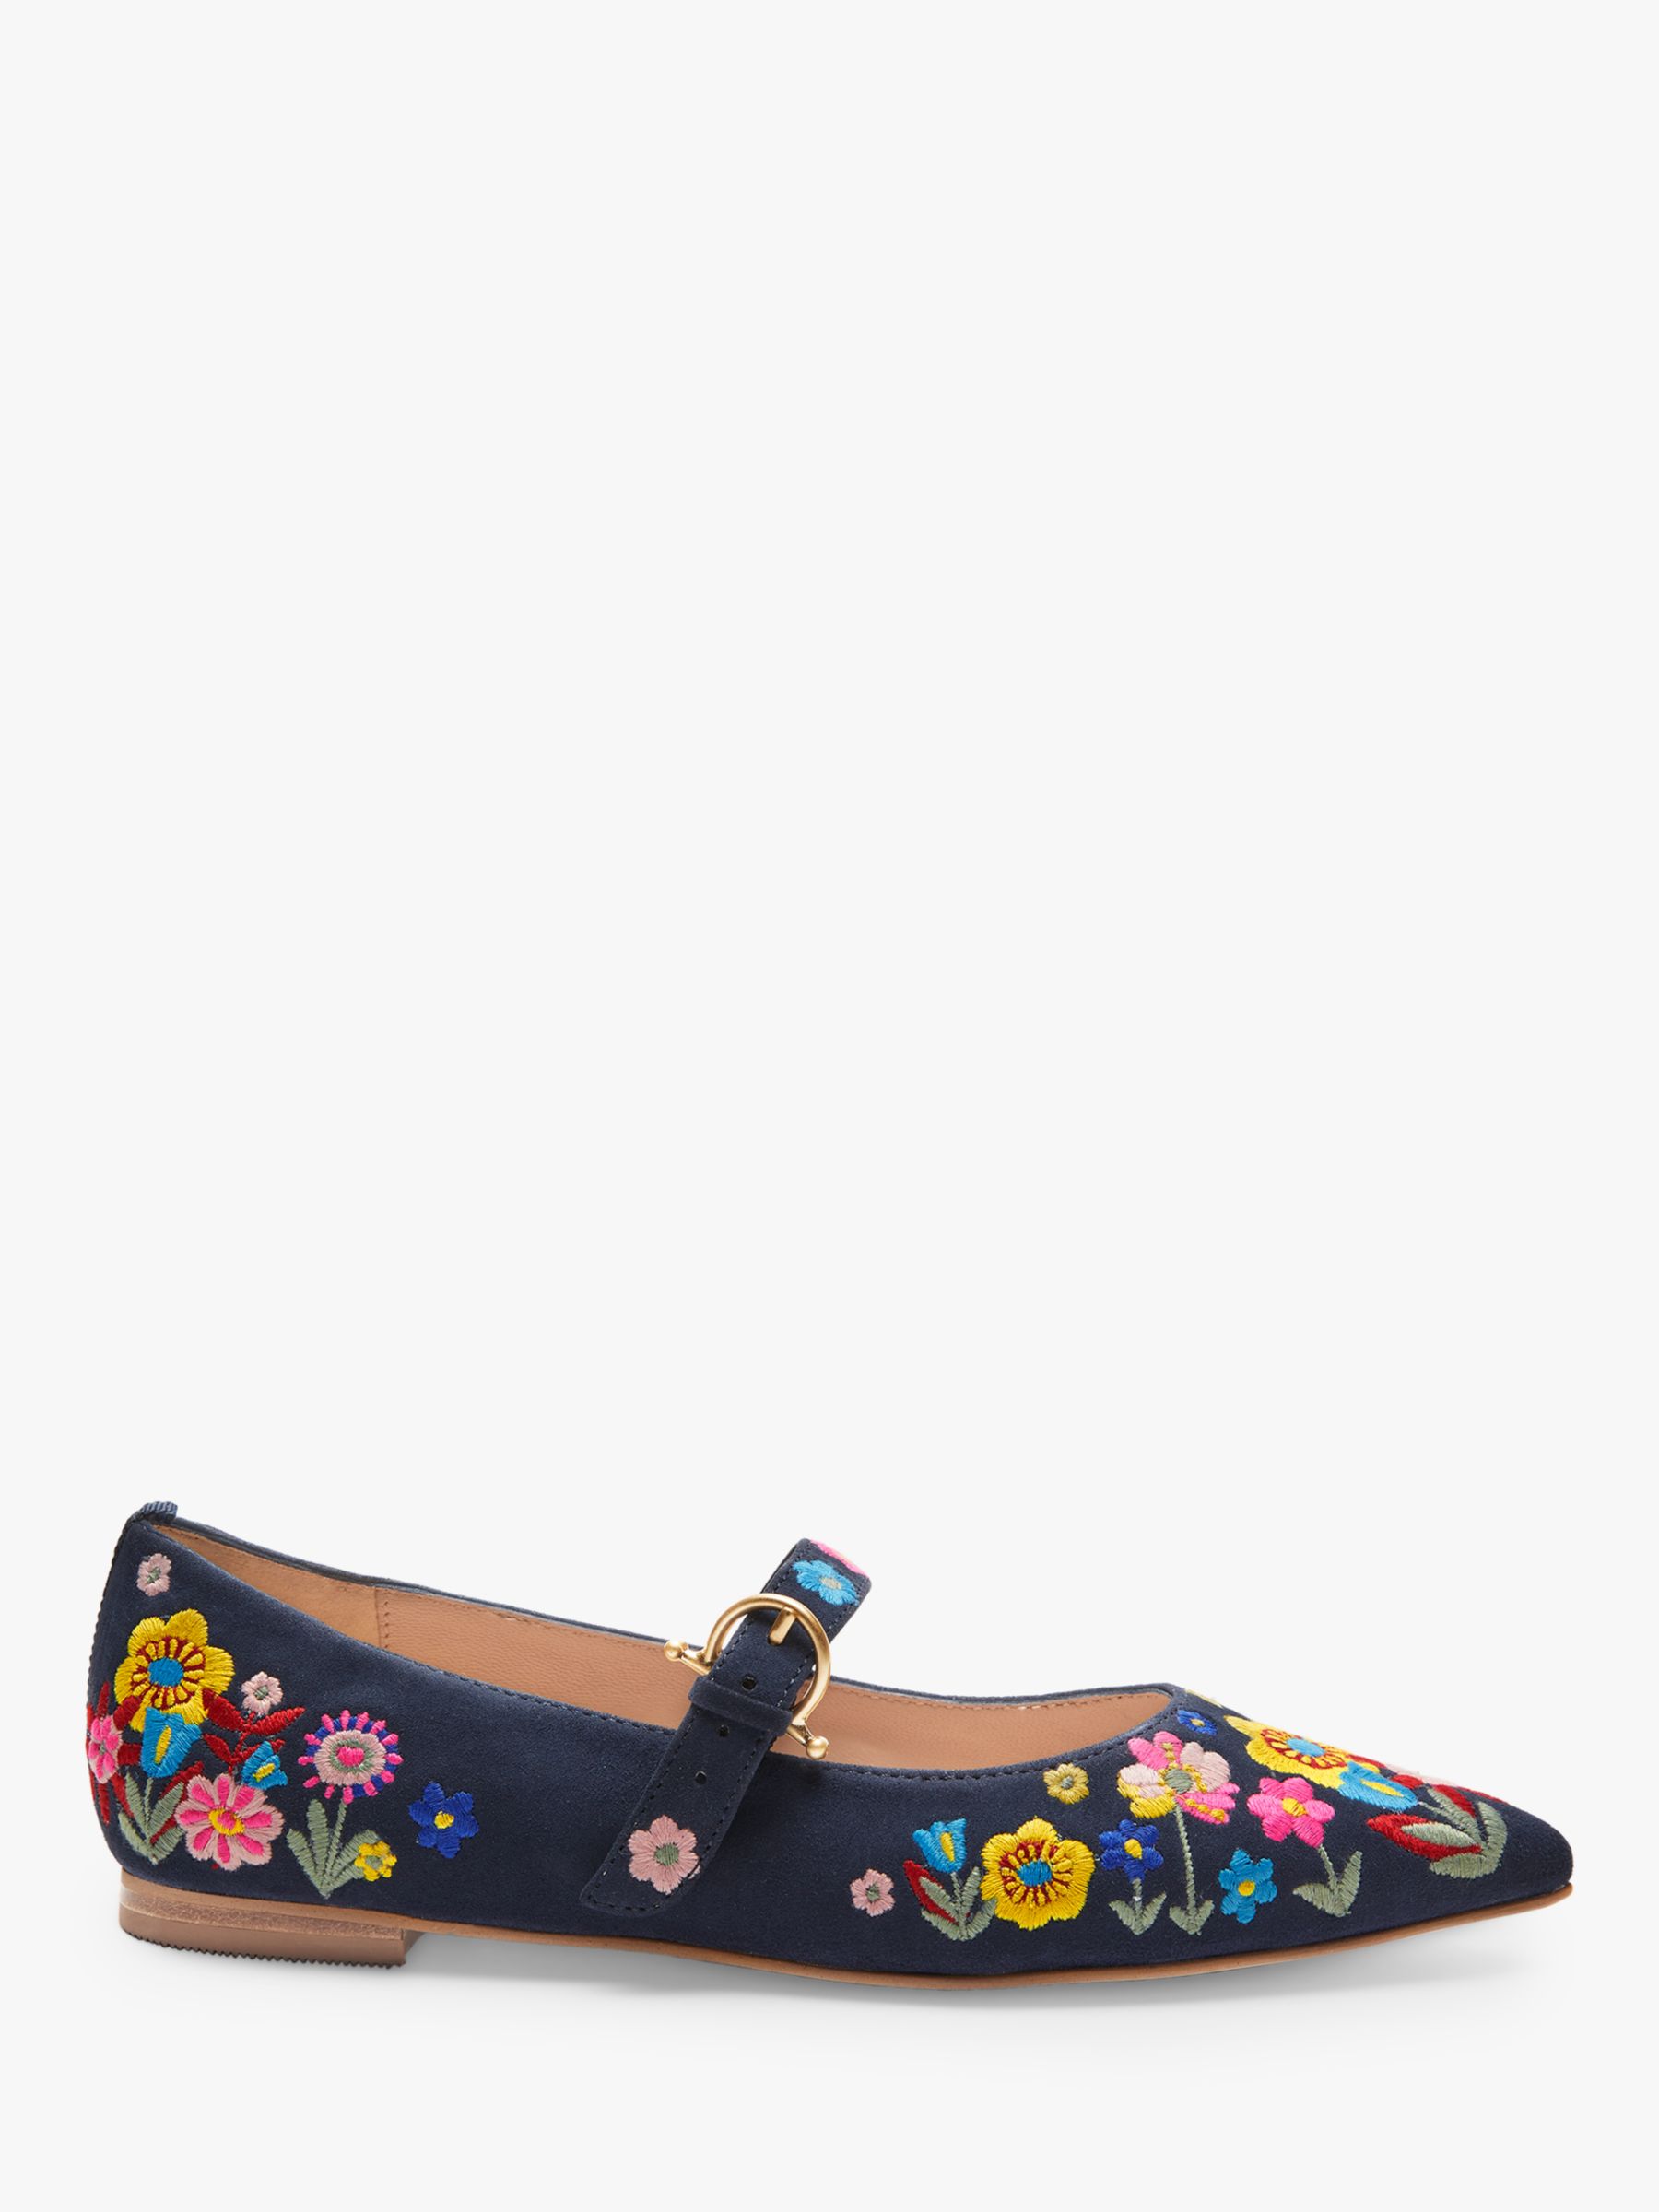 Boden Floral Embroidered Mary Jane Shoes, Navy/Multi